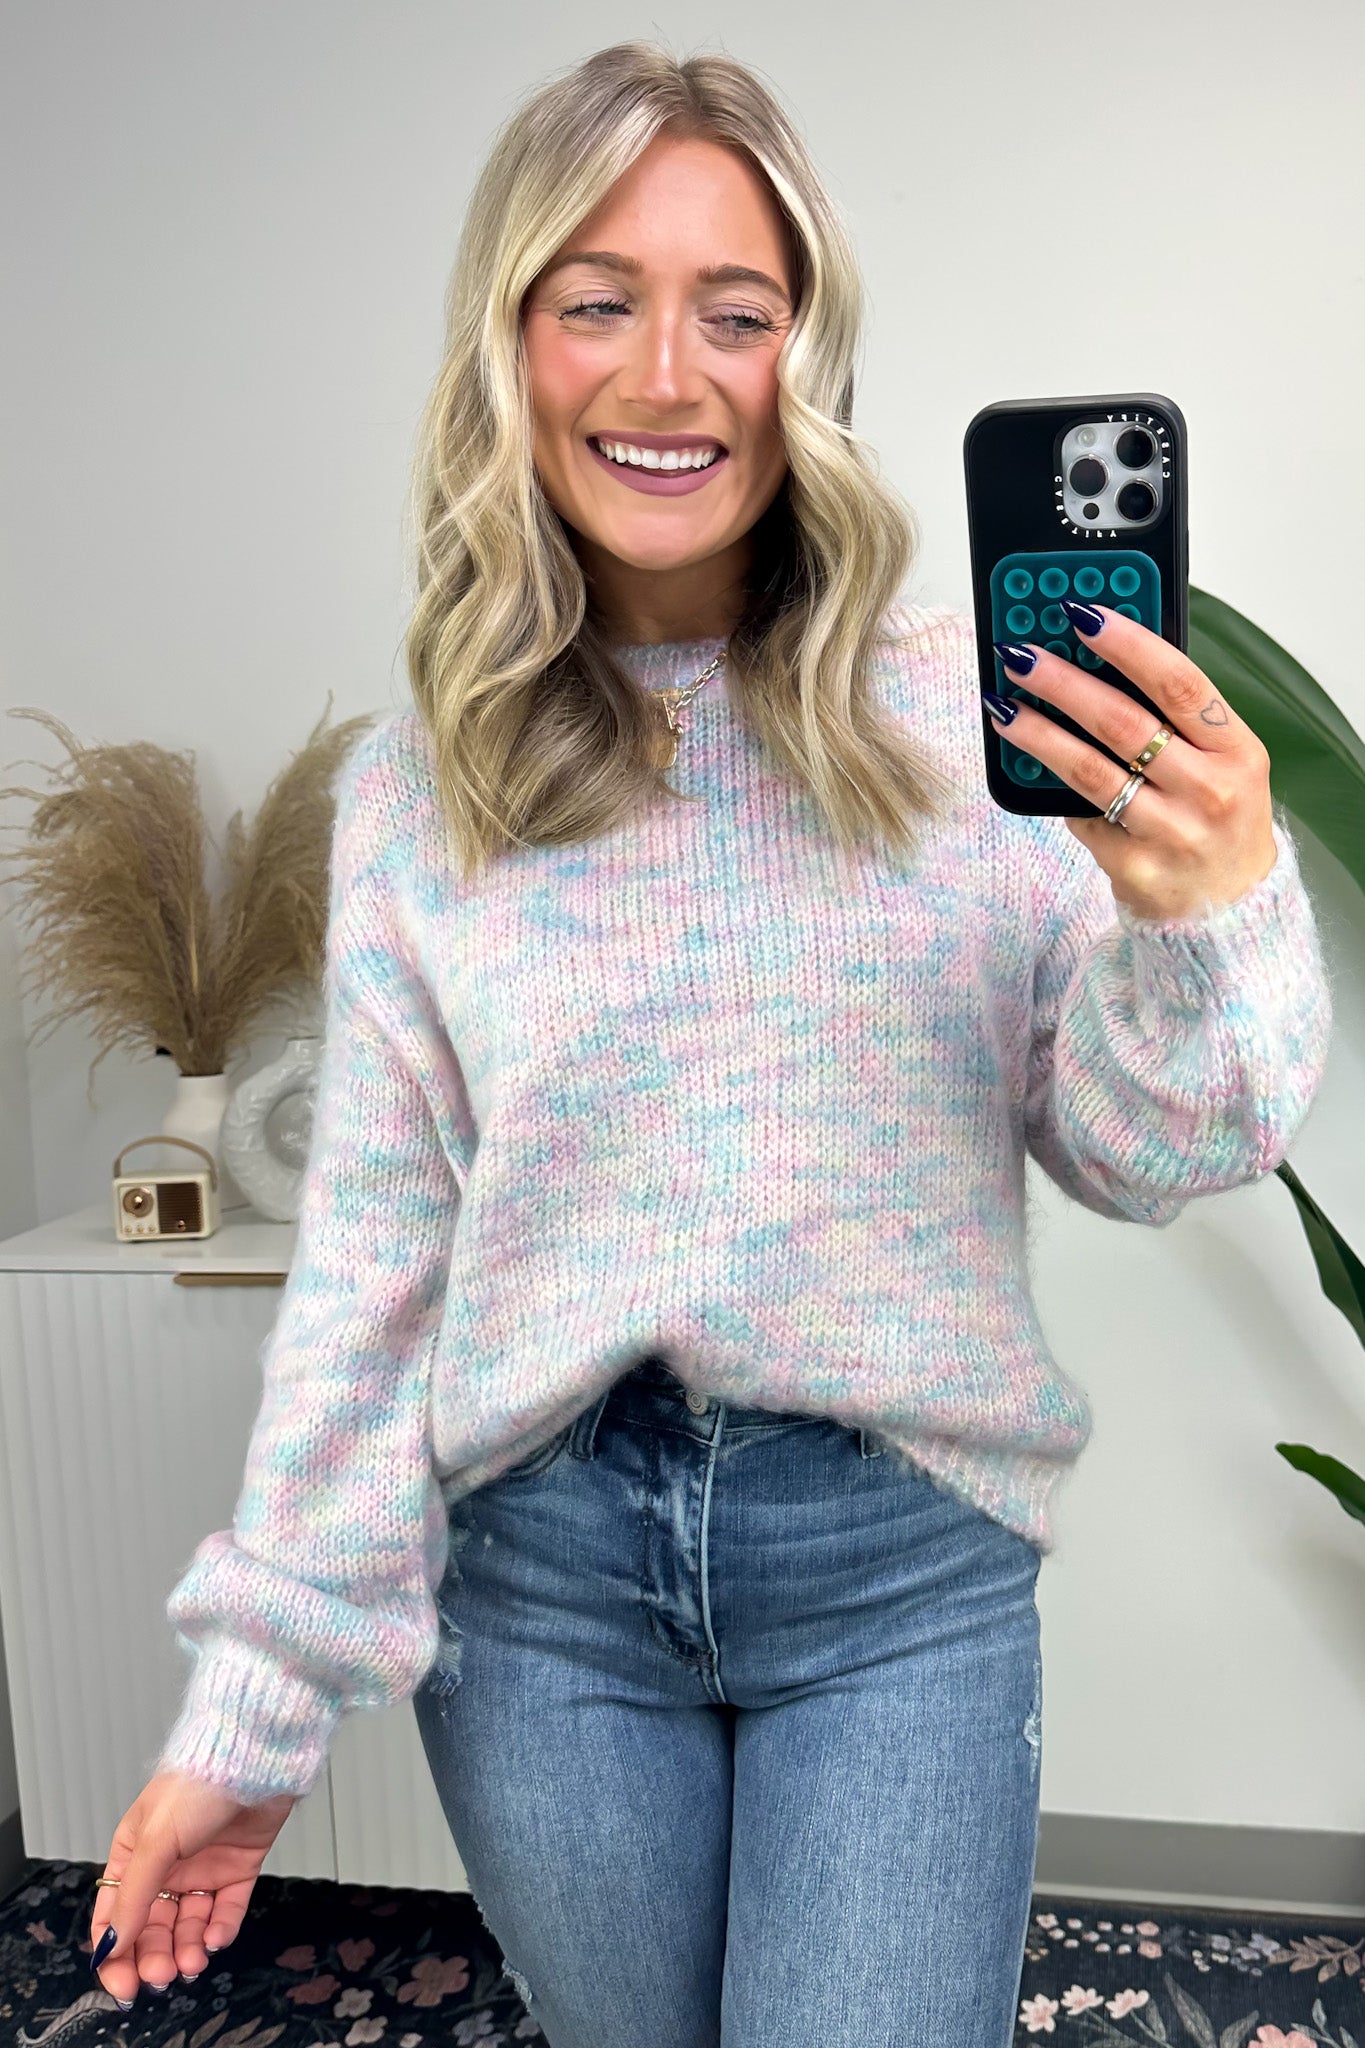 S / Multi Chilly Day Charisma Multi Color Knit Sweater - FINAL SALE - Madison and Mallory